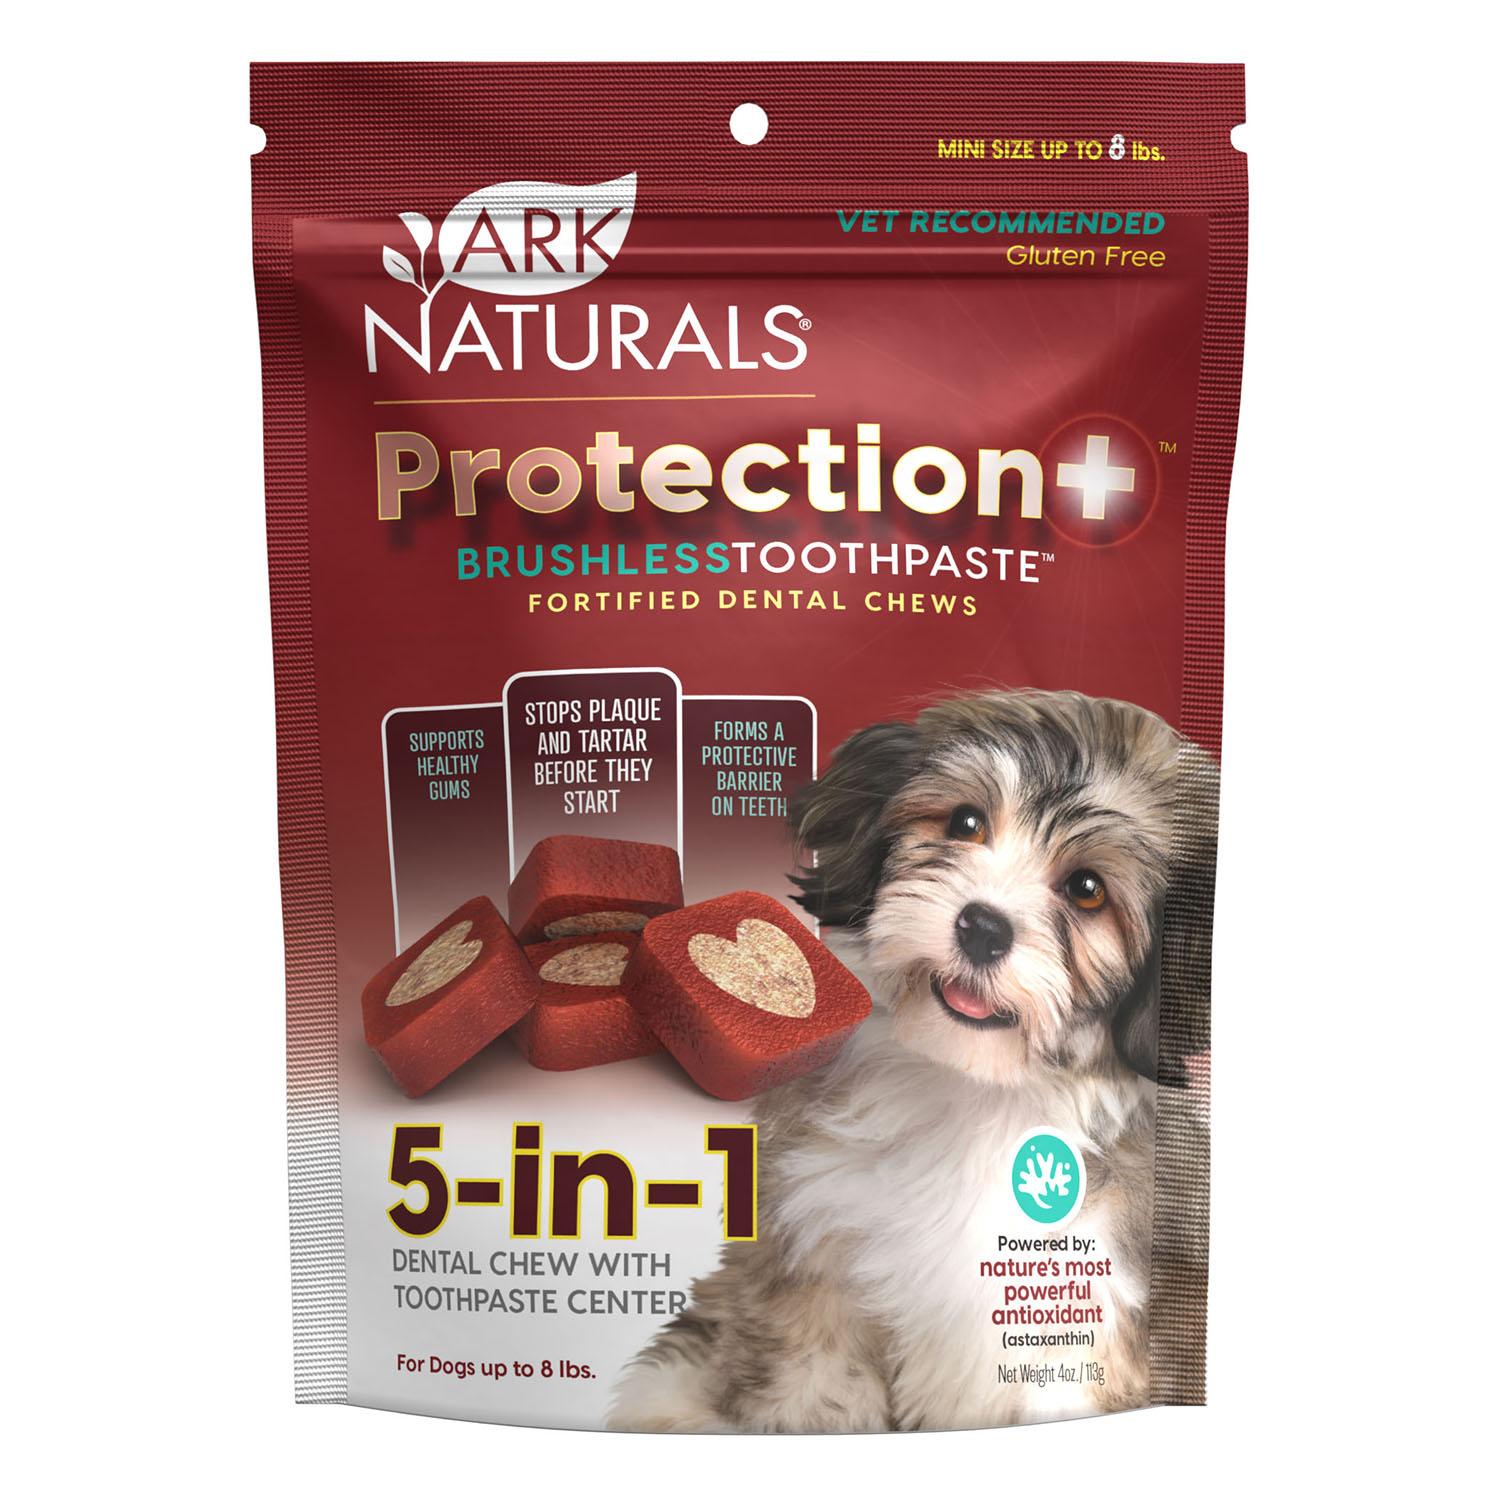 Ark Naturals Protection+ Brushless Toothpaste Fortified Dental Dog Chews